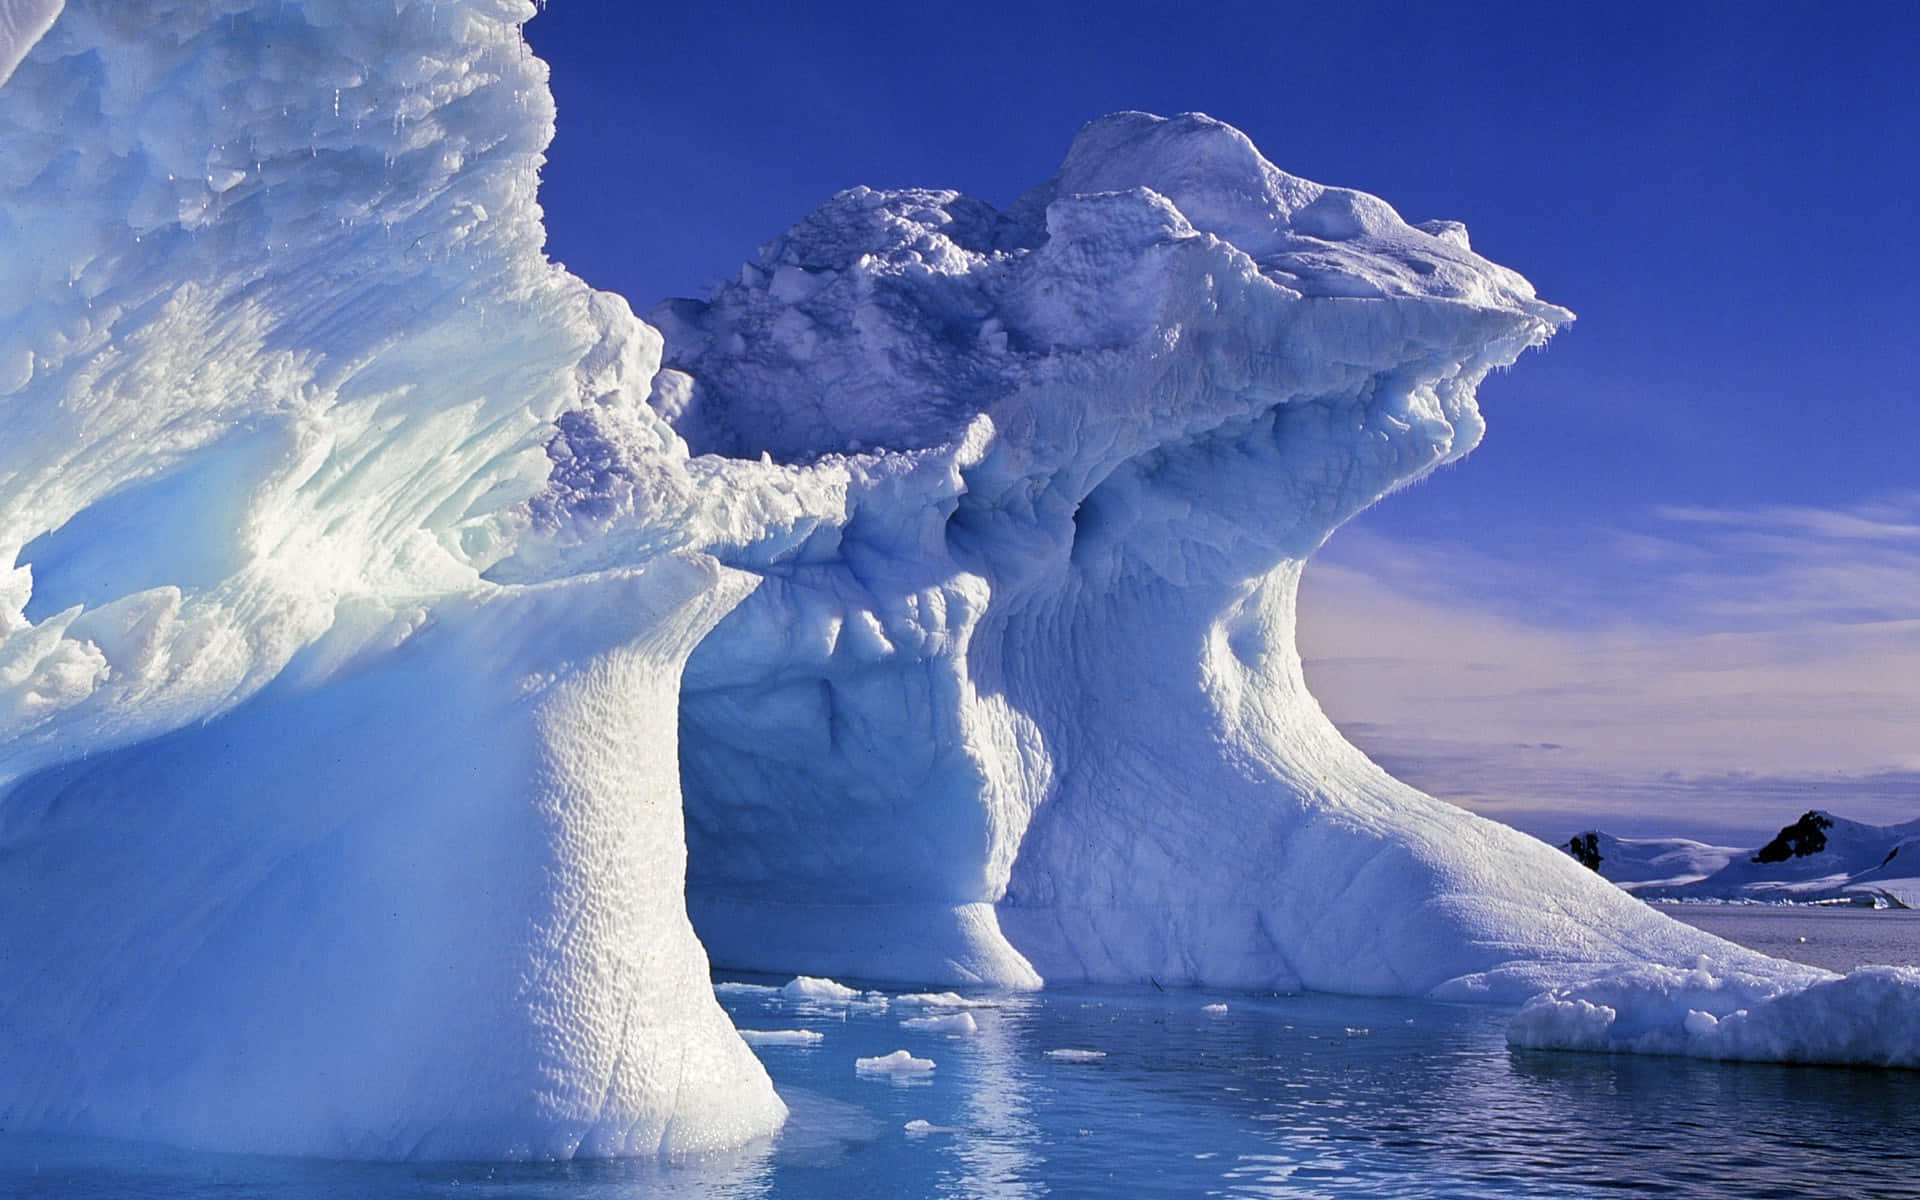 Enjoy the beauty of winter with this breathtaking ice landscape!